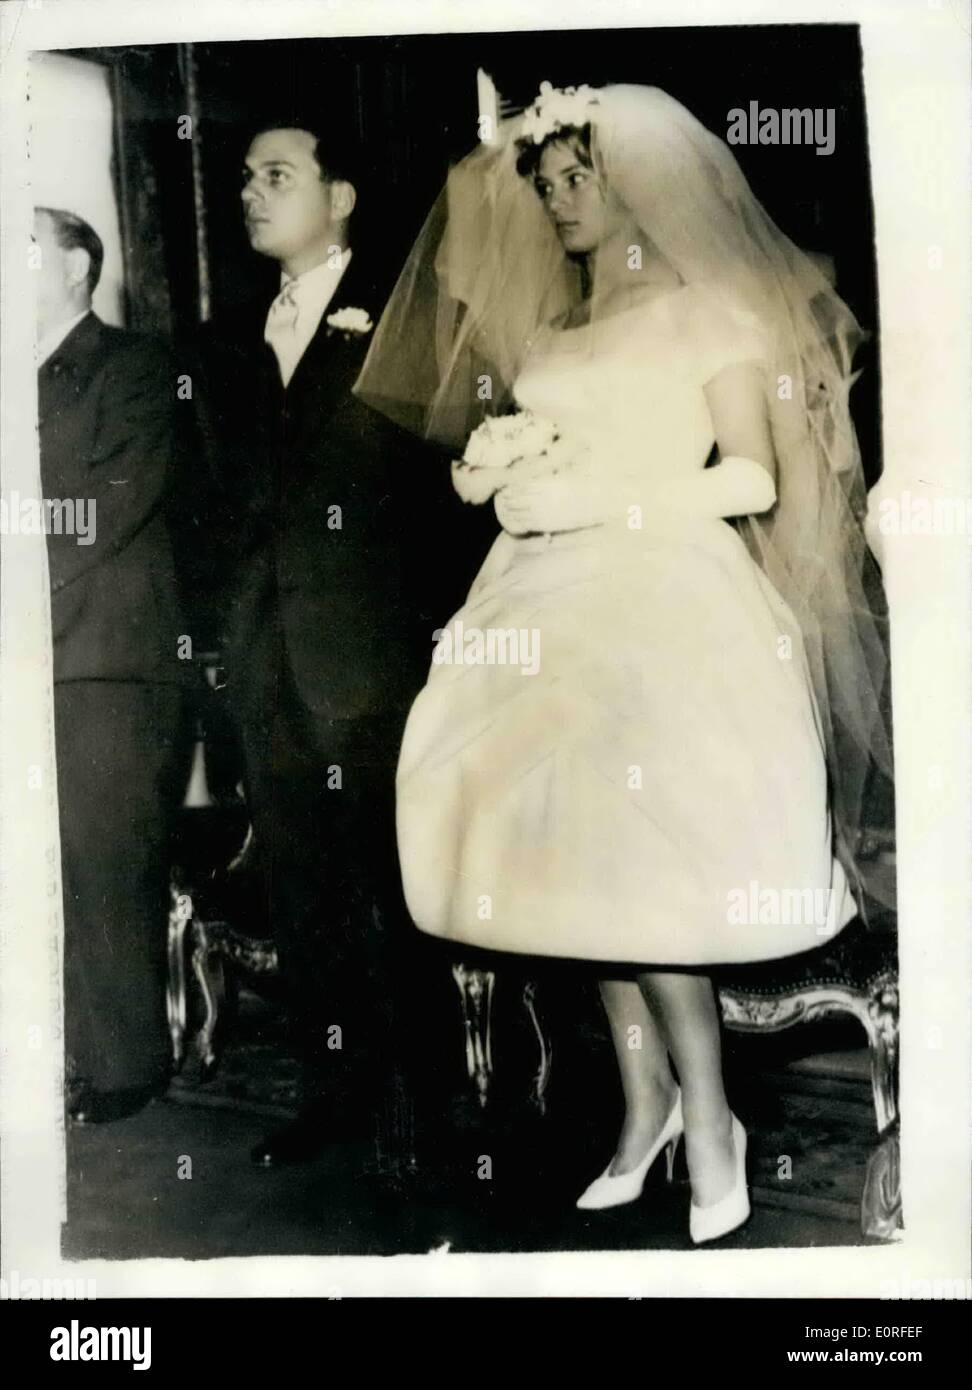 May 05, 1959 - Jonathan sieff weds in Paris: The wedding took place in Paris today of 25-year-old Jonathan Sieff, son of marks and Spencer director, Mr. Michael Sieff and a great - nephew of the company's chairman. sir Simon marks - and 20-year old Nicole moschietto, daughter of a Monte Carlo restauranteur, photo shows The bride and groom after their wedding in Paris today. Stock Photo